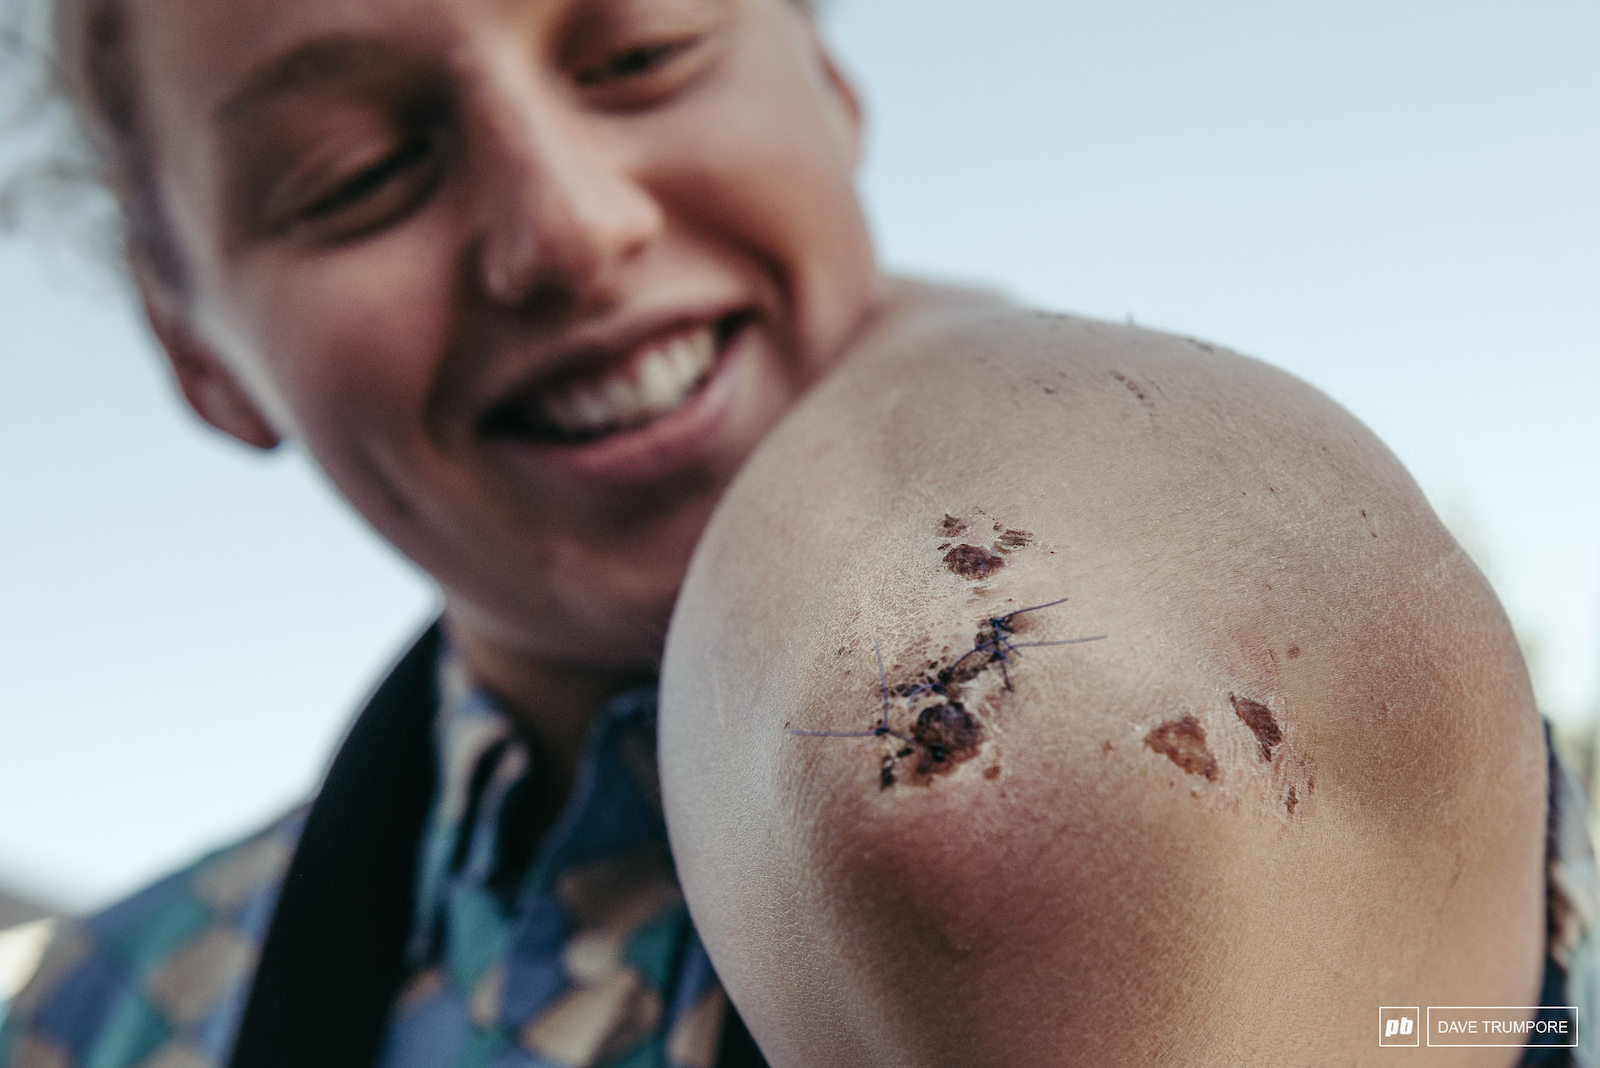 Bex Baraona admiring the first stitches of her lifetime. Unfortunately some cracked ribs will keep her out of the mix this weekend.